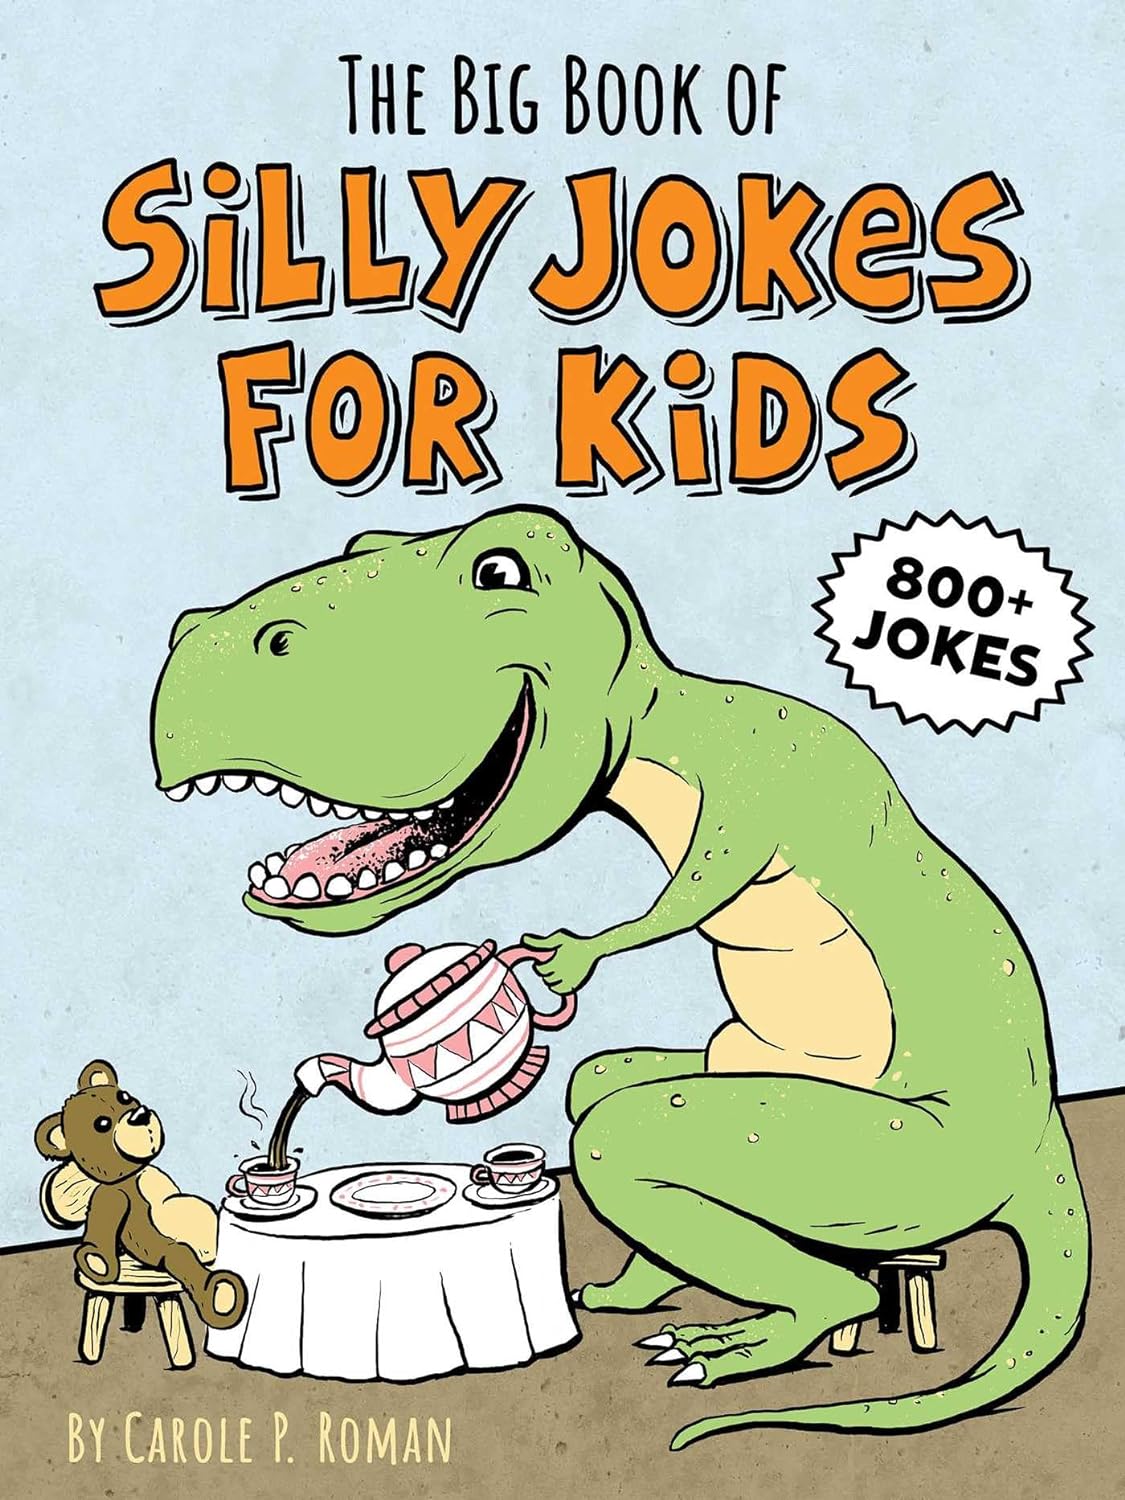 Uniites™ Books,The Big Book of Silly Jokes for Kids Paperback – August 27, 2019, $8.91